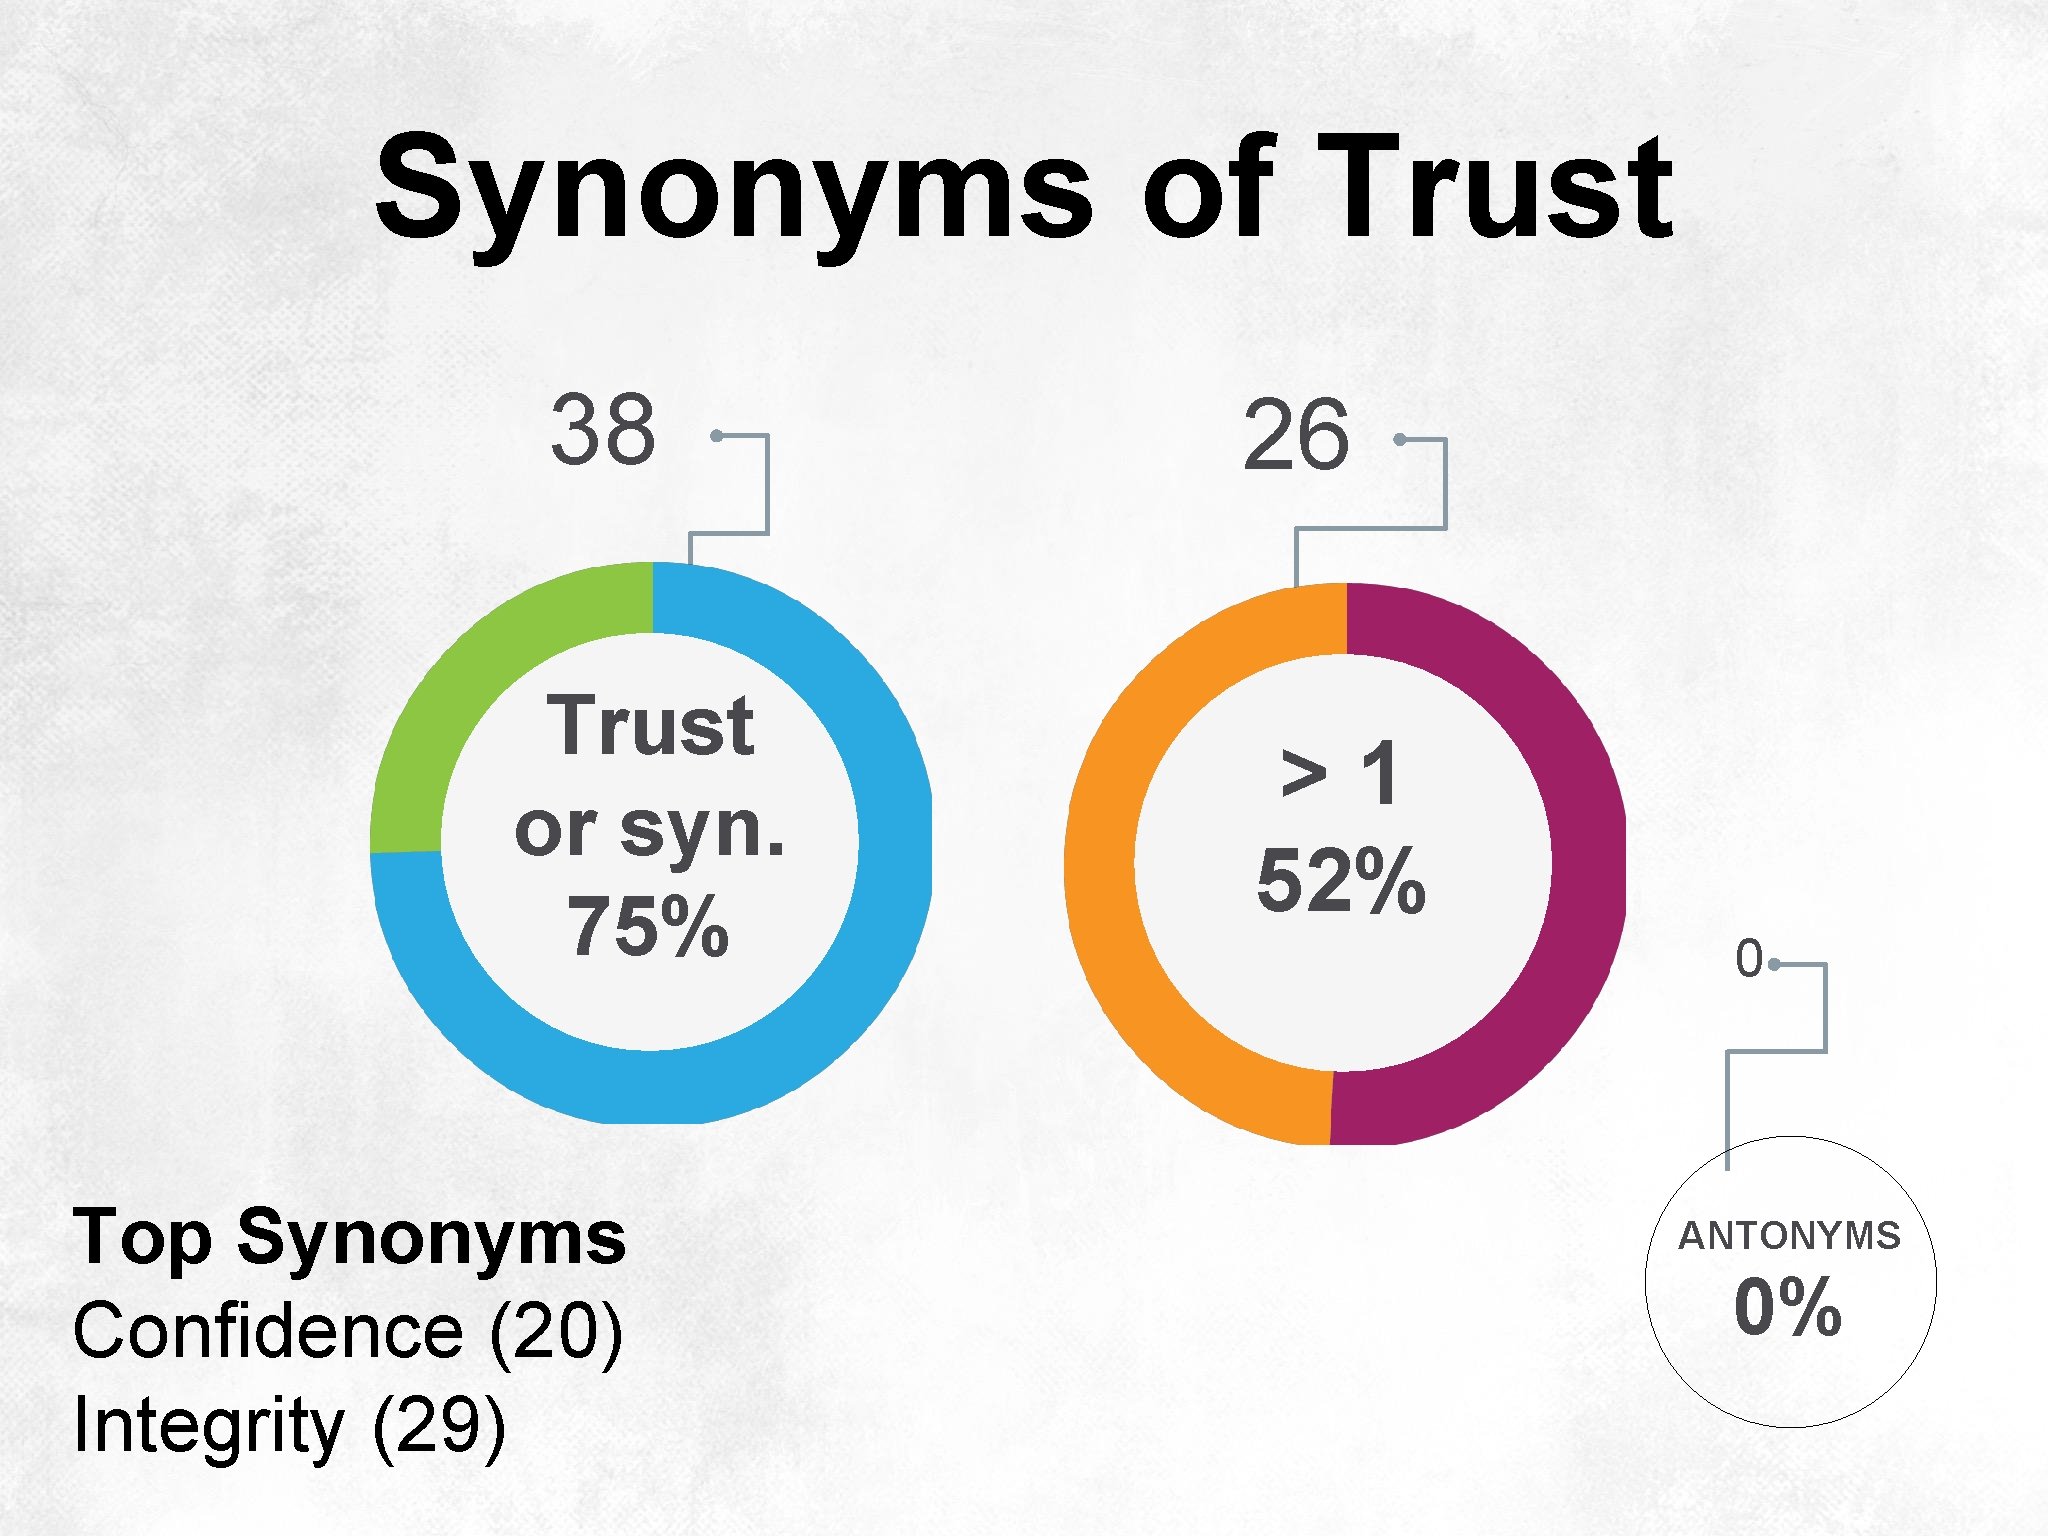 Synonyms of Trust 38 Trust or syn. 75% Top Synonyms Confidence (20) Integrity (29)